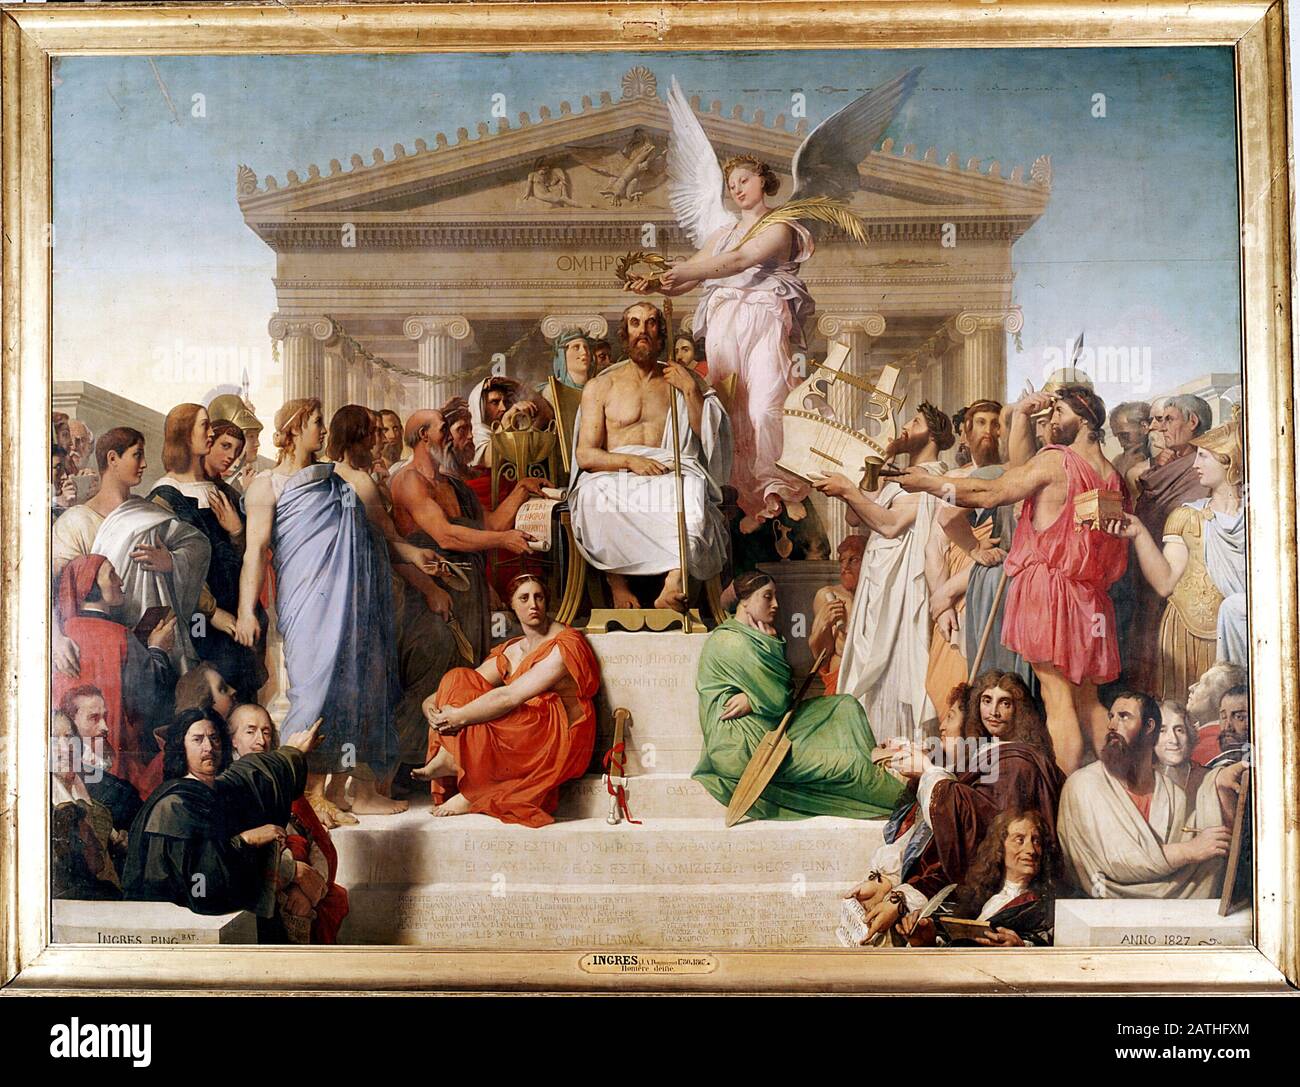 Jean Auguste Dominique Ingres French school The Apotheosis of Homer 1827 Oil on canvas (386 x 512 cm) Paris, musee du Louvre Stock Photo